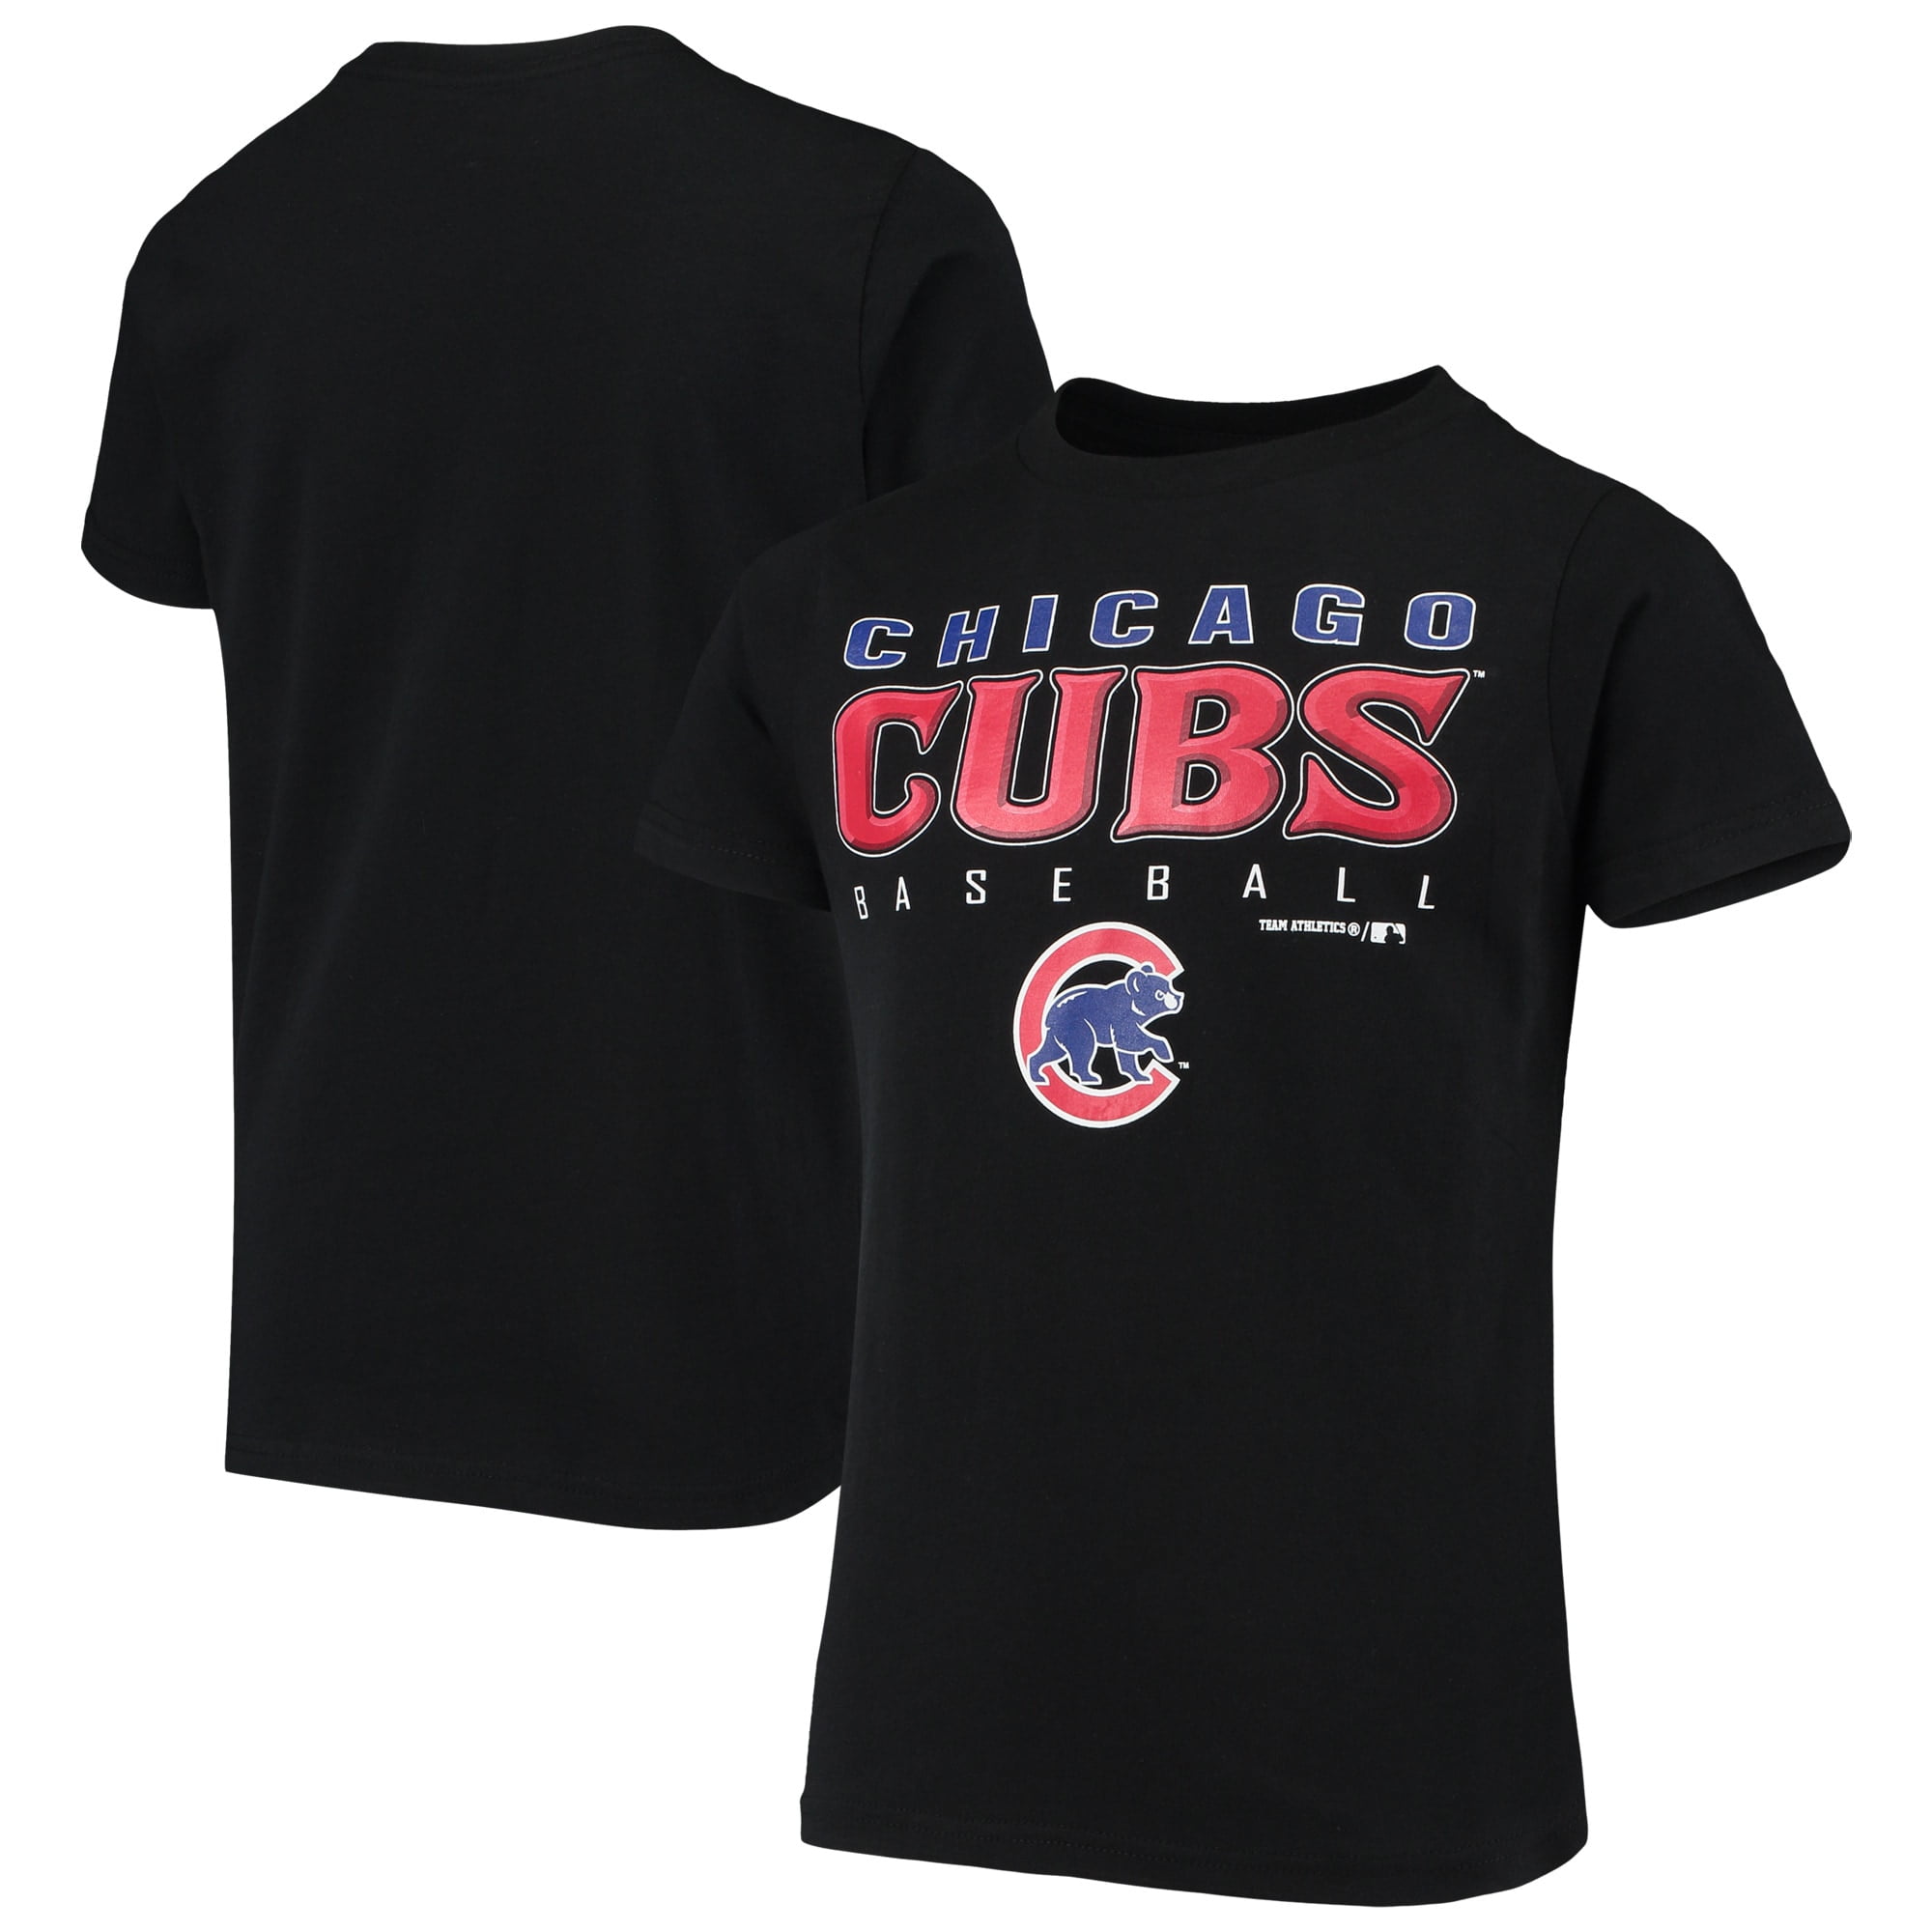 Chicago Cubs Love Watching With Grandpa Kids Toddler T-Shirt 